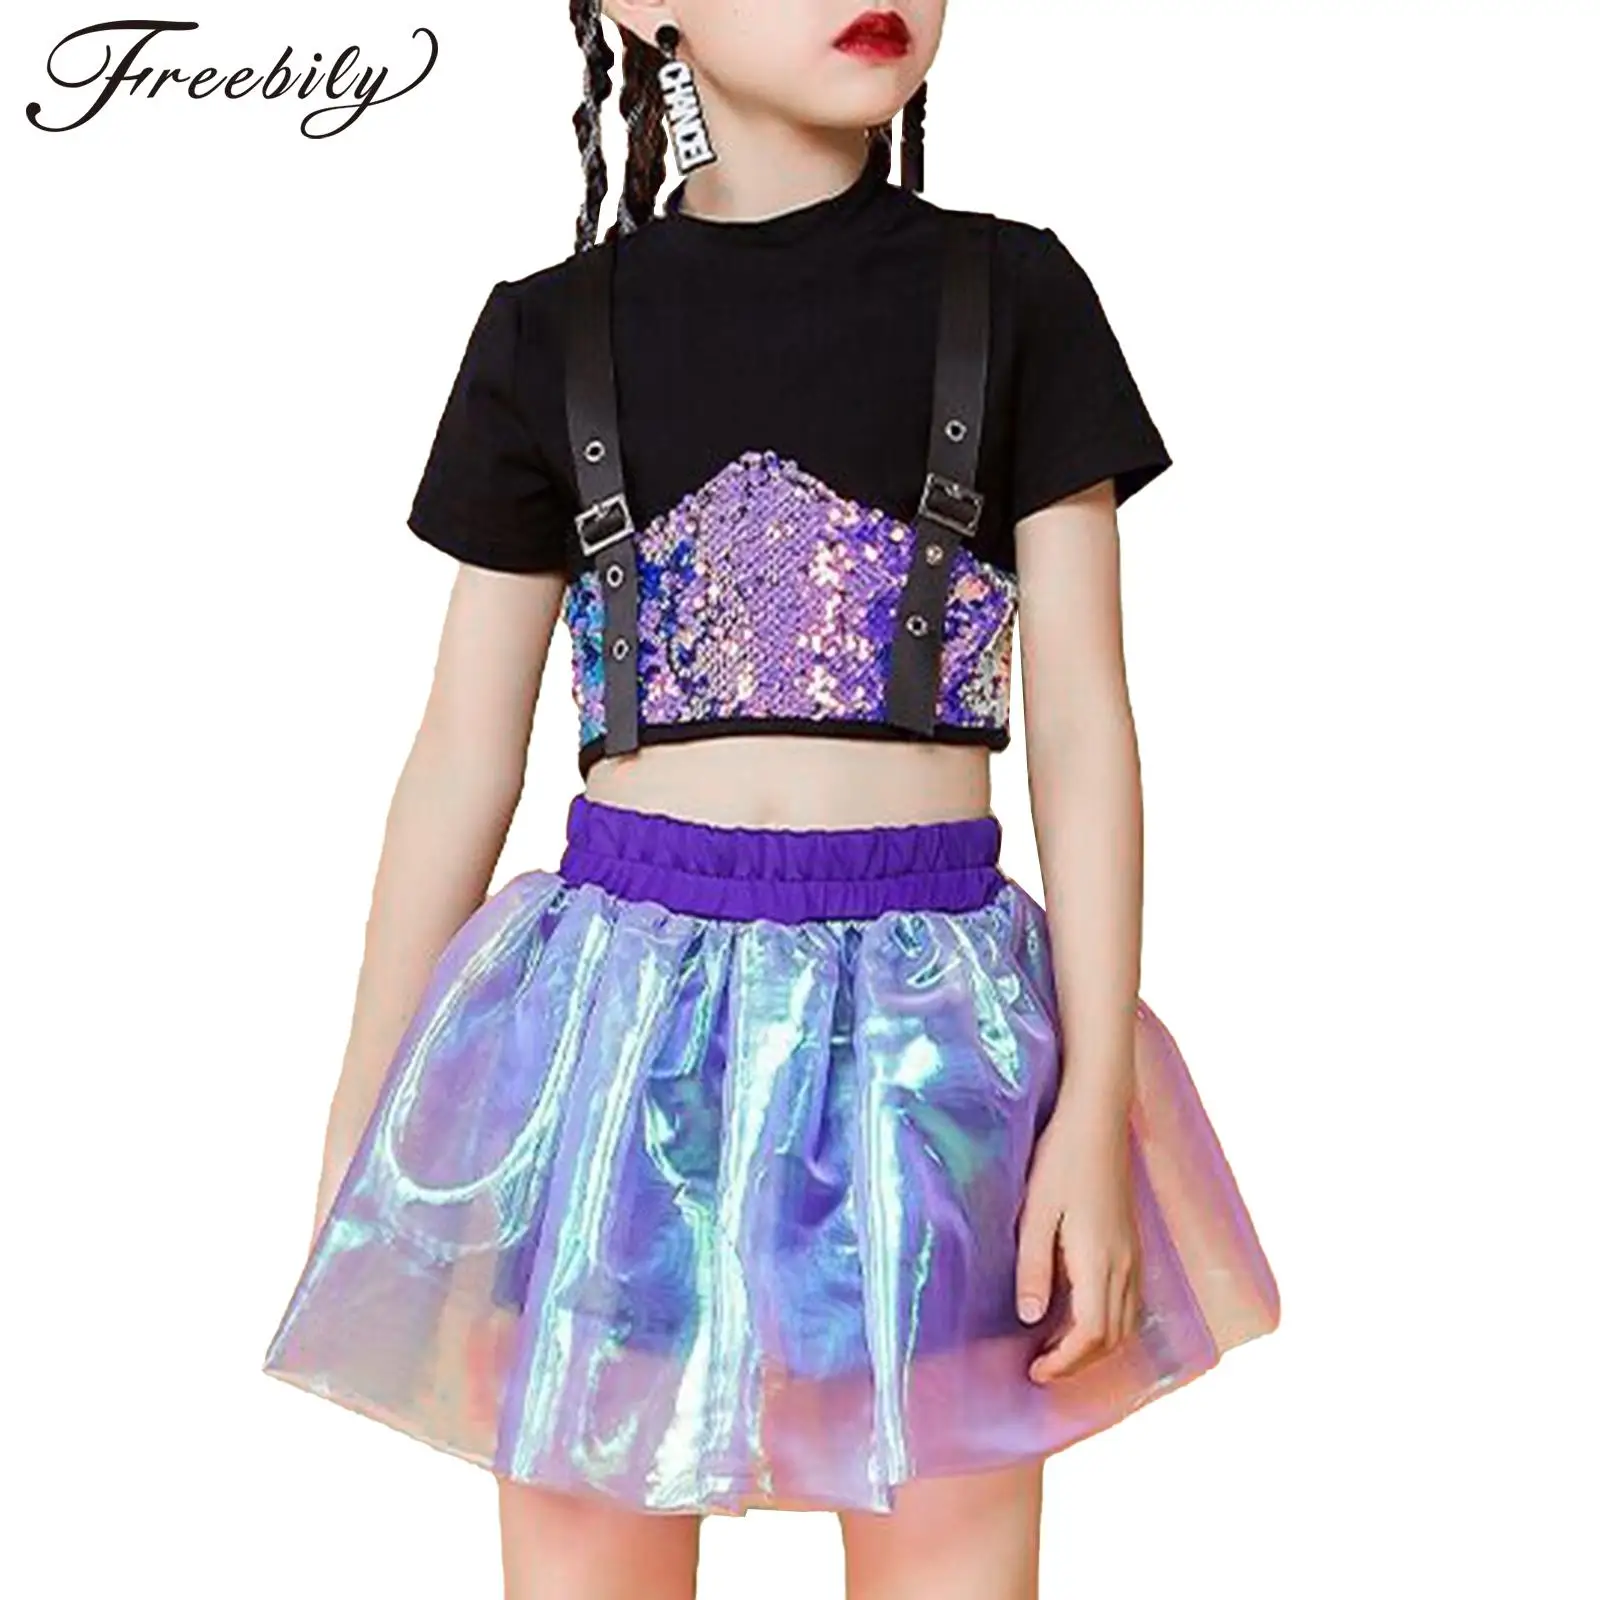 Girls Shiny Dance Outfit Glittery Crop Top+Skirt Set Kids Stage Performing Wear